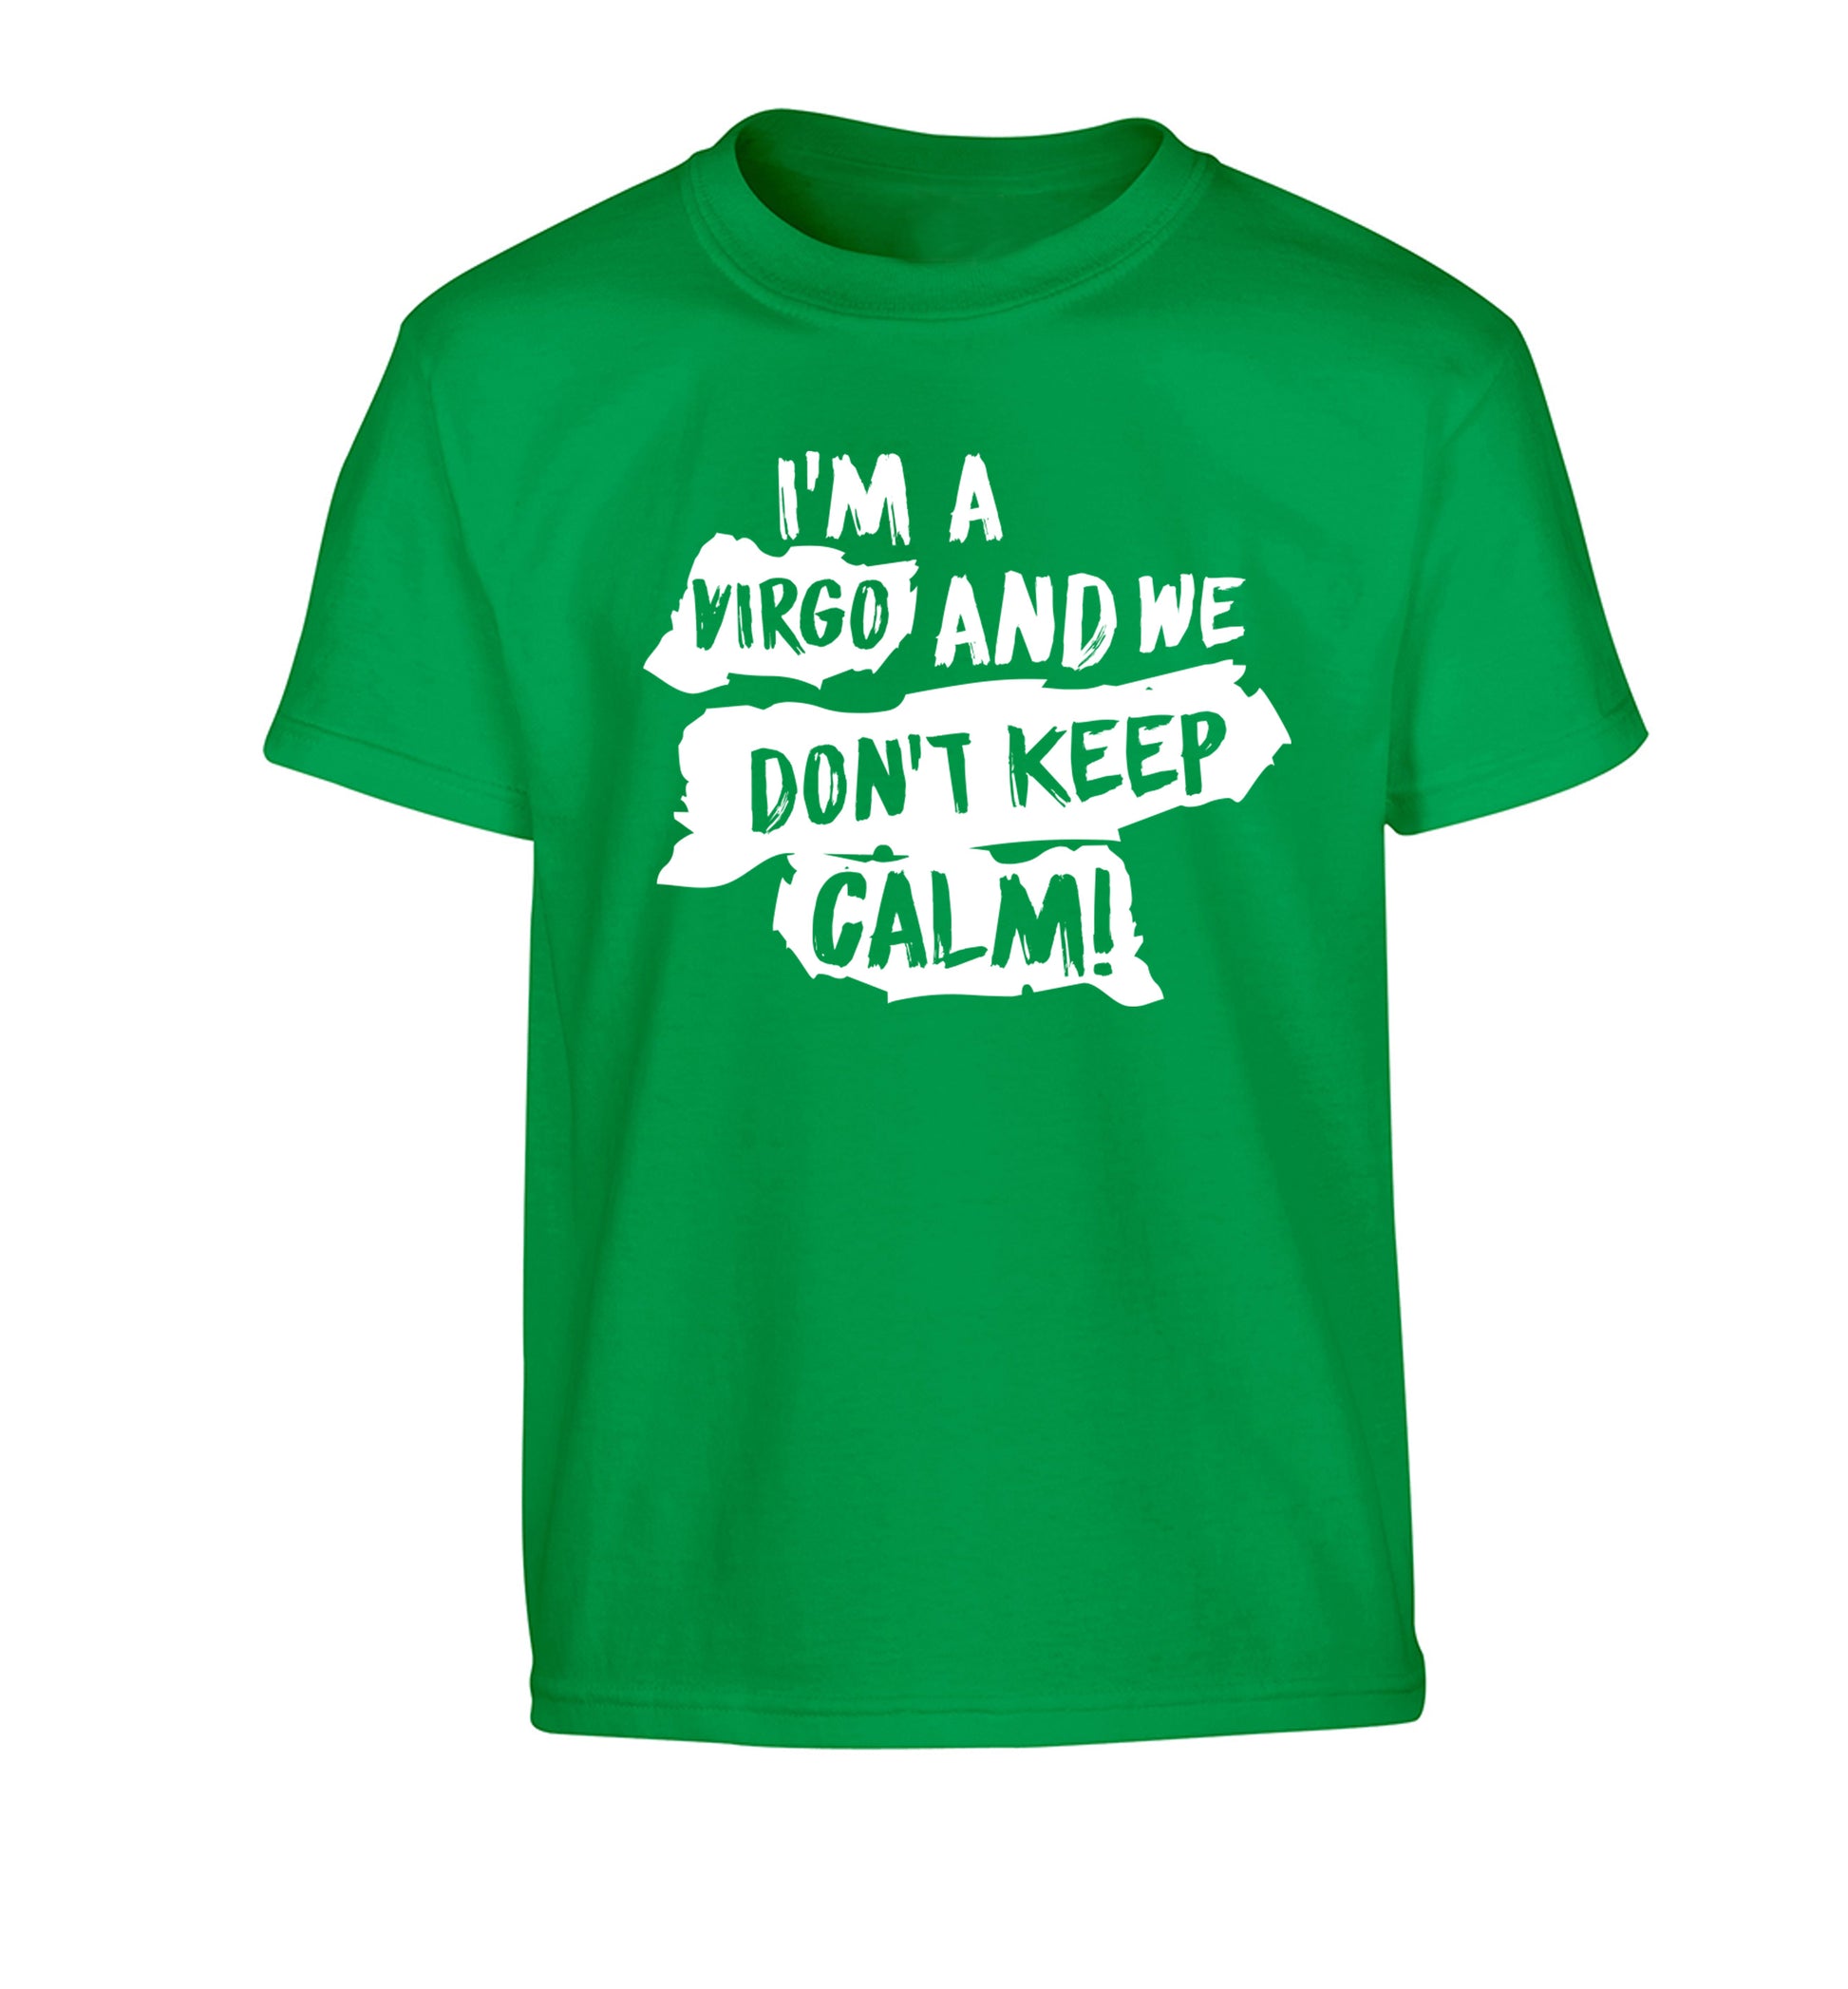 I'm a virgo and we don't keep calm Children's green Tshirt 12-13 Years